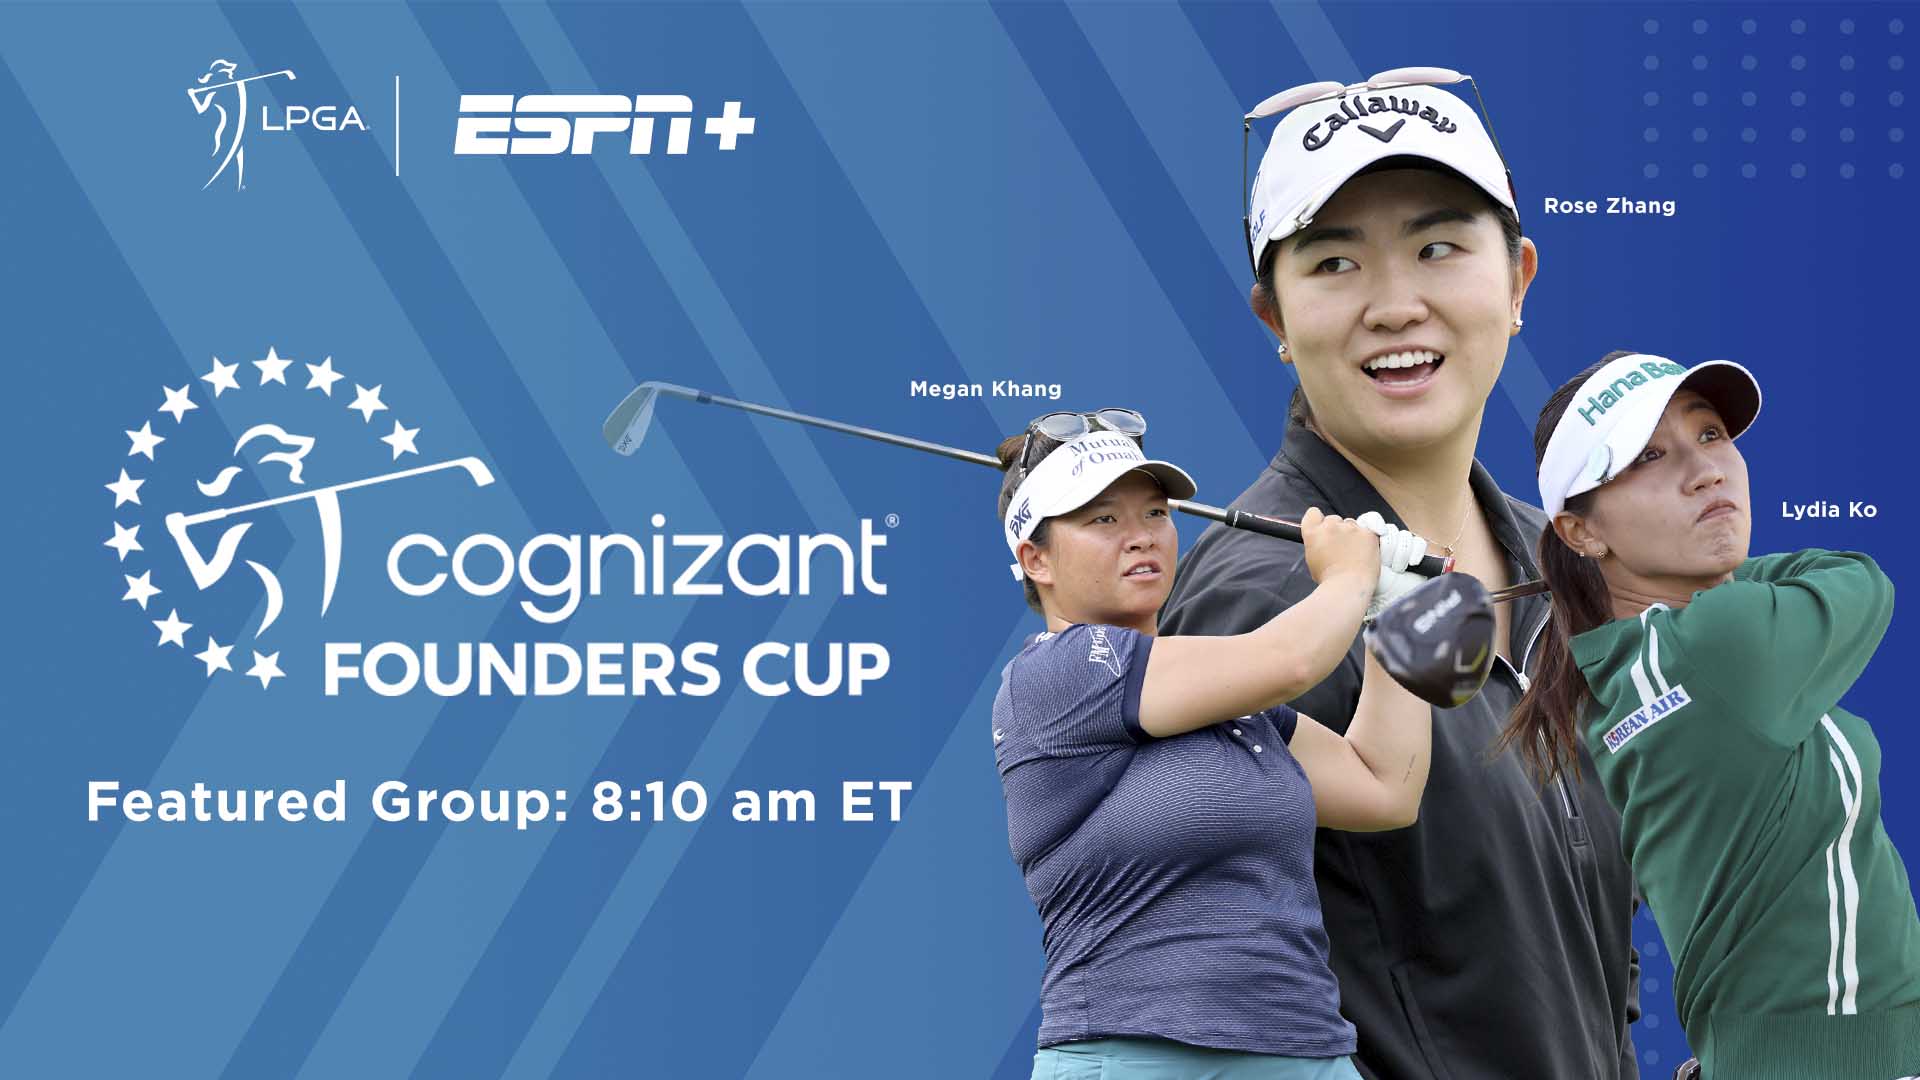 Live Coverage of the Second Round of the Cognizant Founders Cup Featured Groups Starting on ESPN